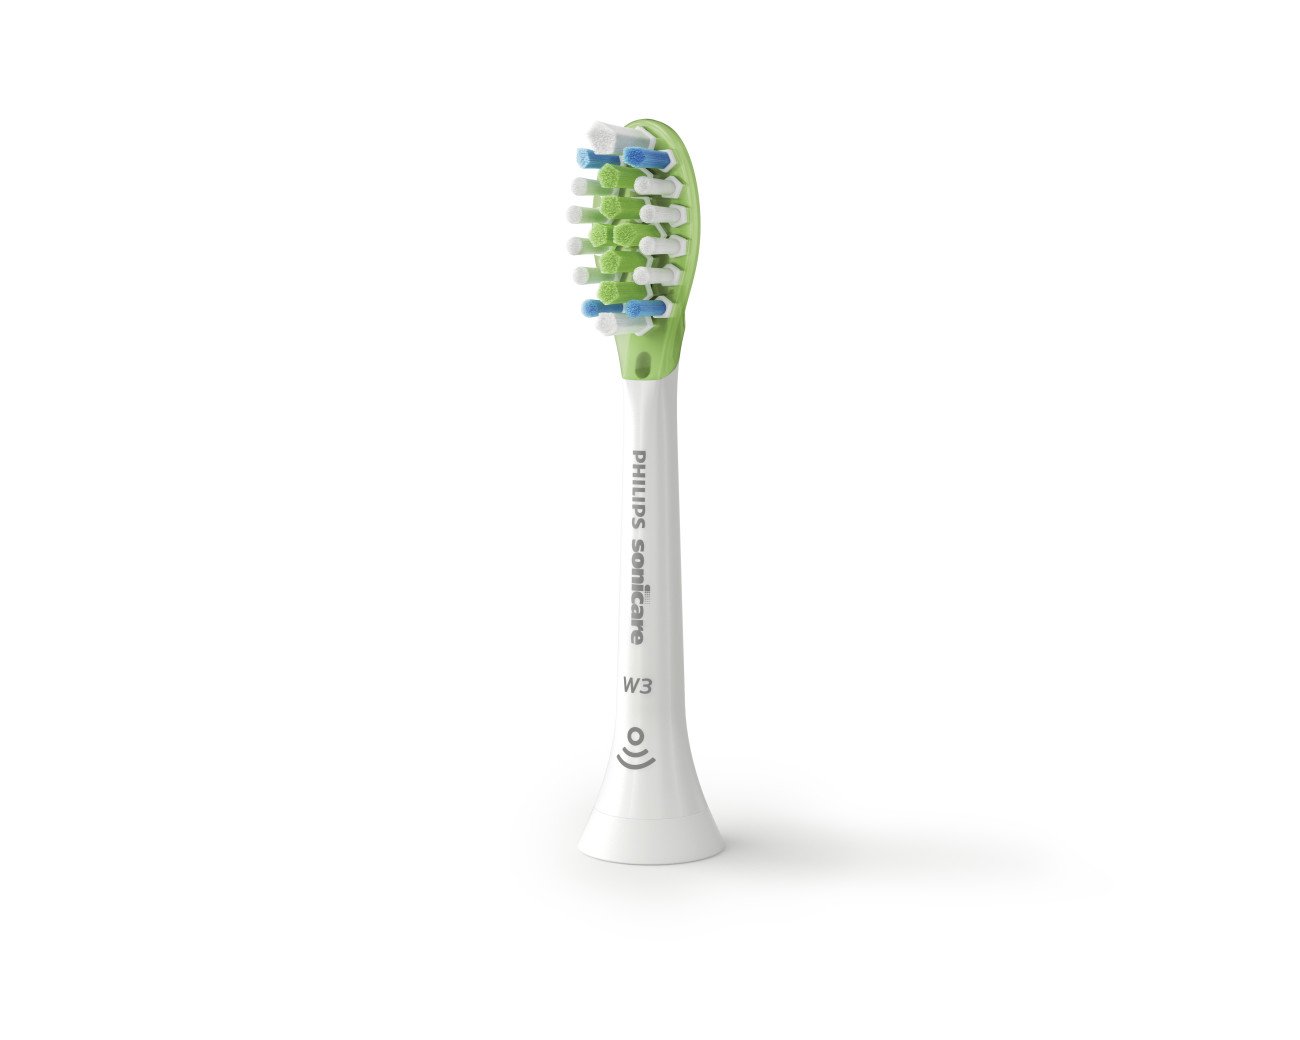 Philips Sonicare Diamond Clean Smart Electric Rechargeable Toothbrush for Complete Oral Care, 9300 Series - HX9903/30, White, 2.31 Pound